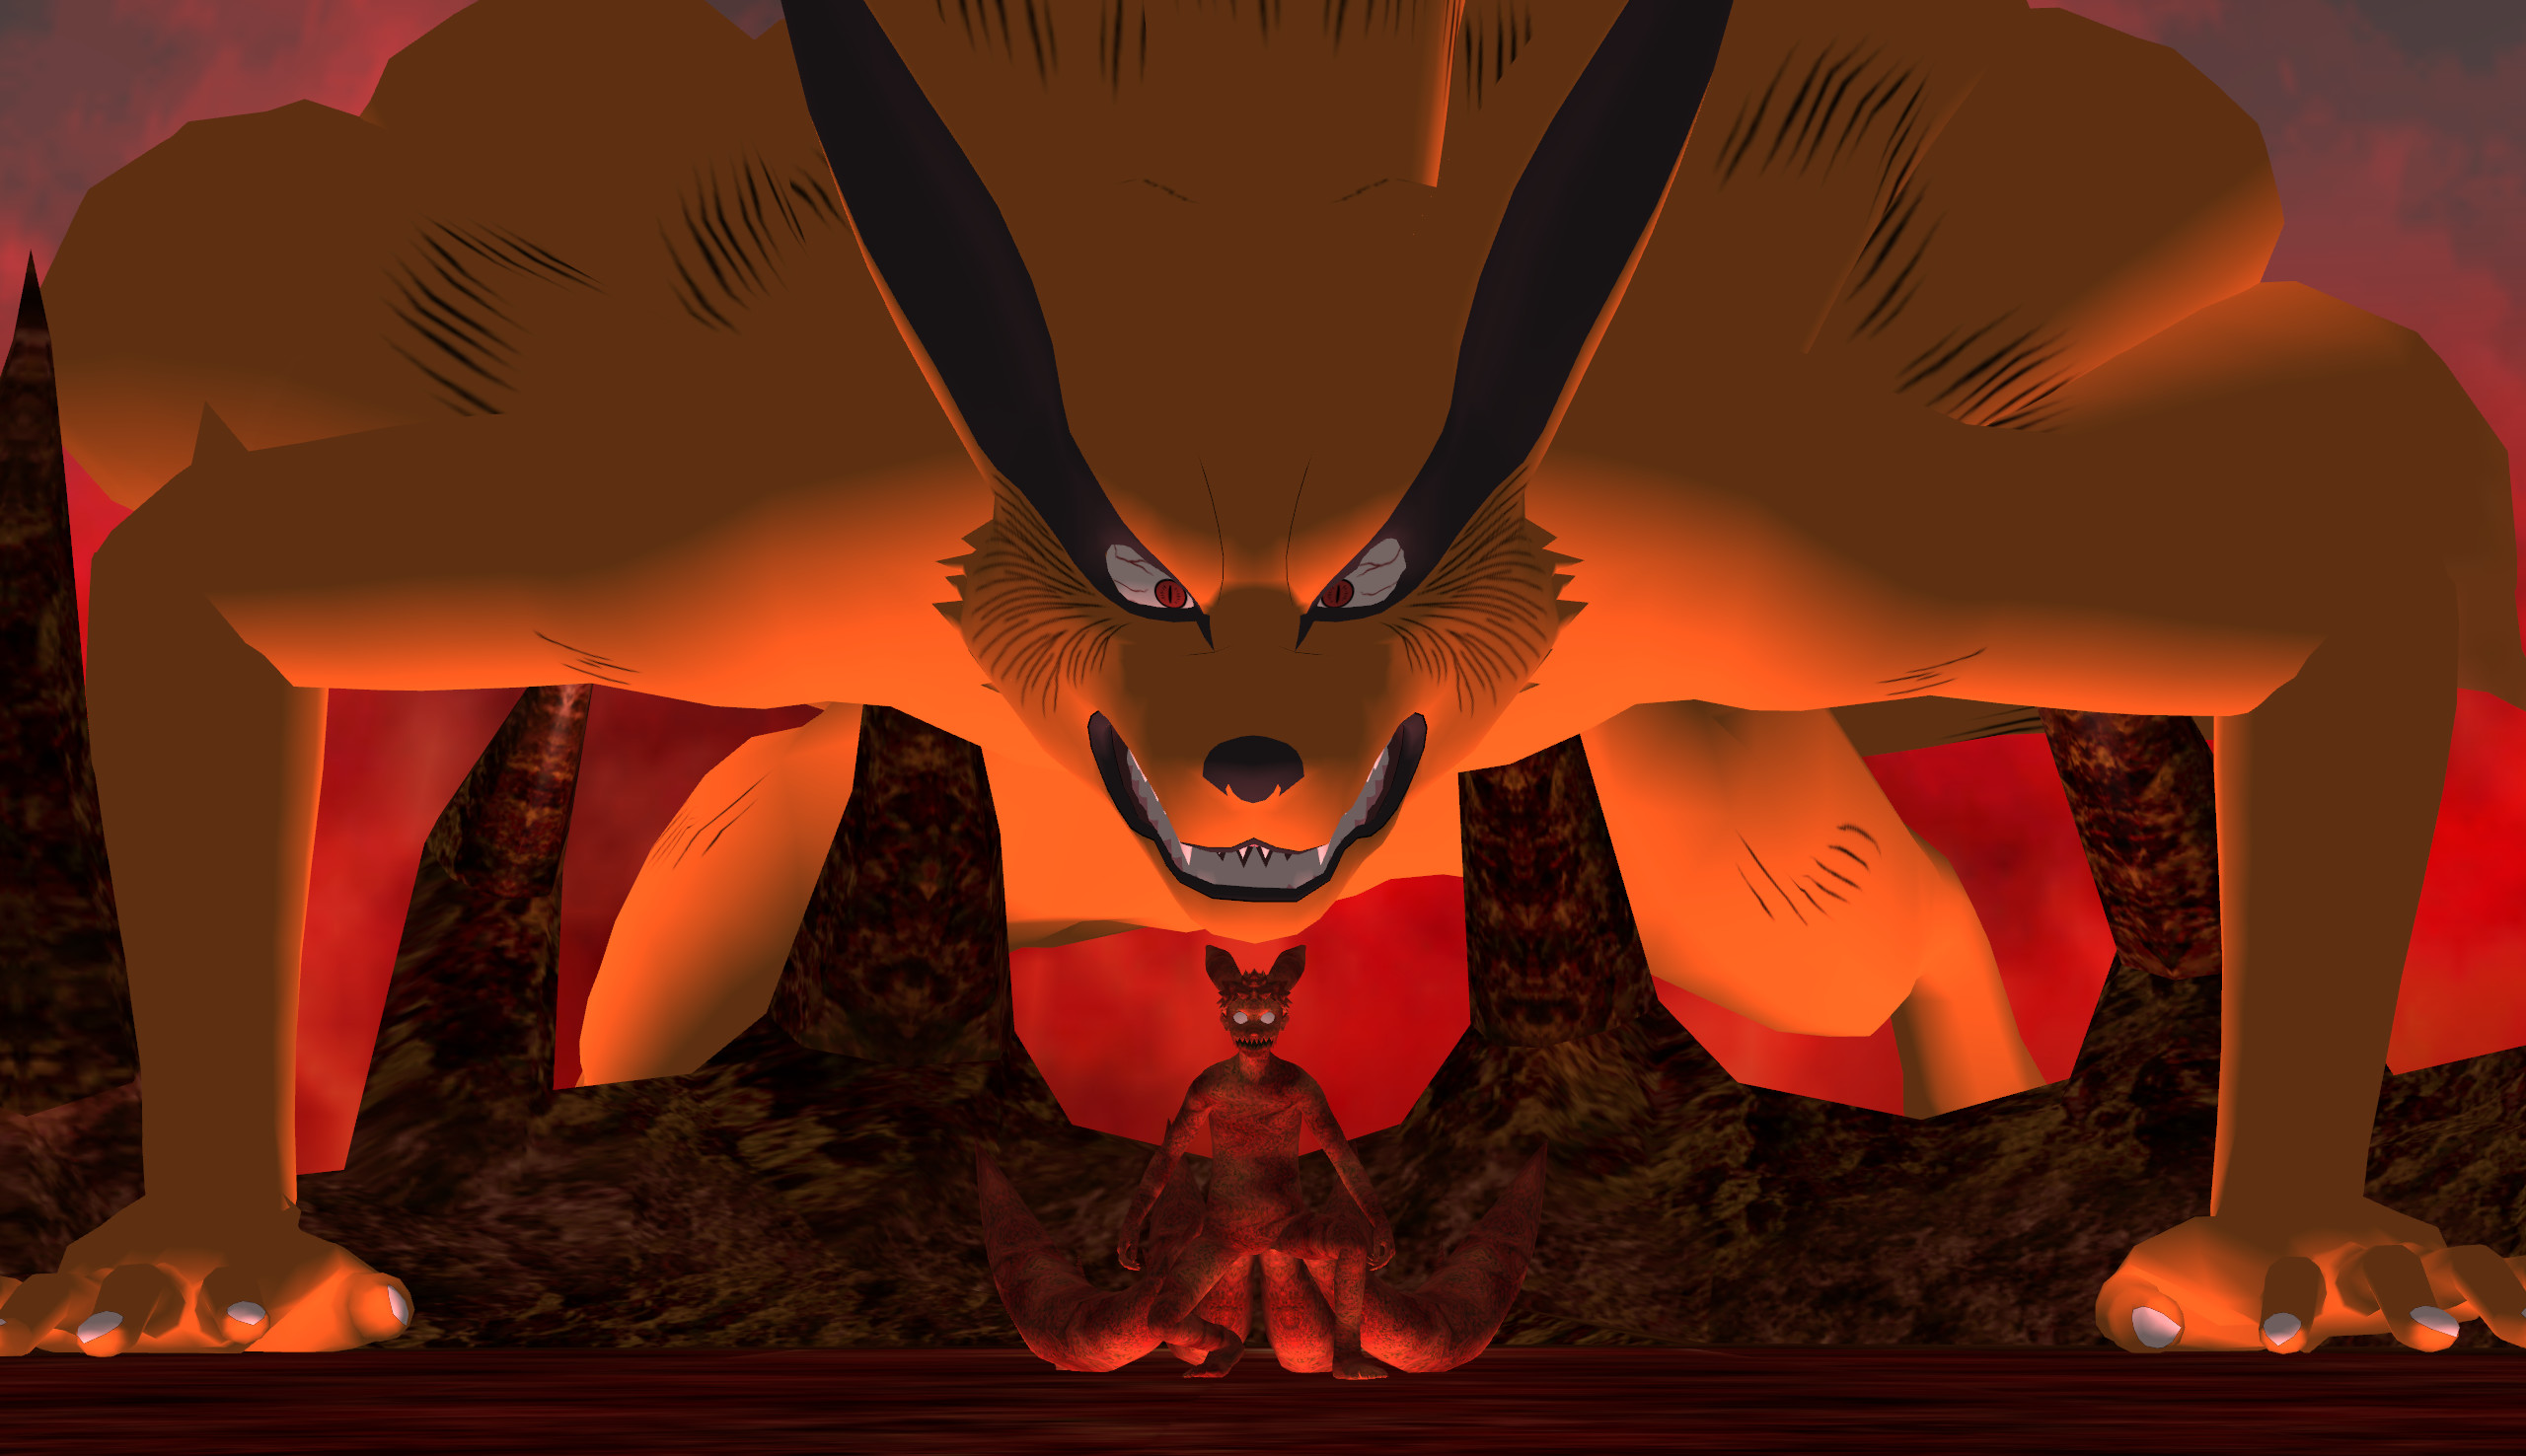 2560x1476 Kyuubi Kurama and Naruto four tails form WallPaper by agrael34 on .